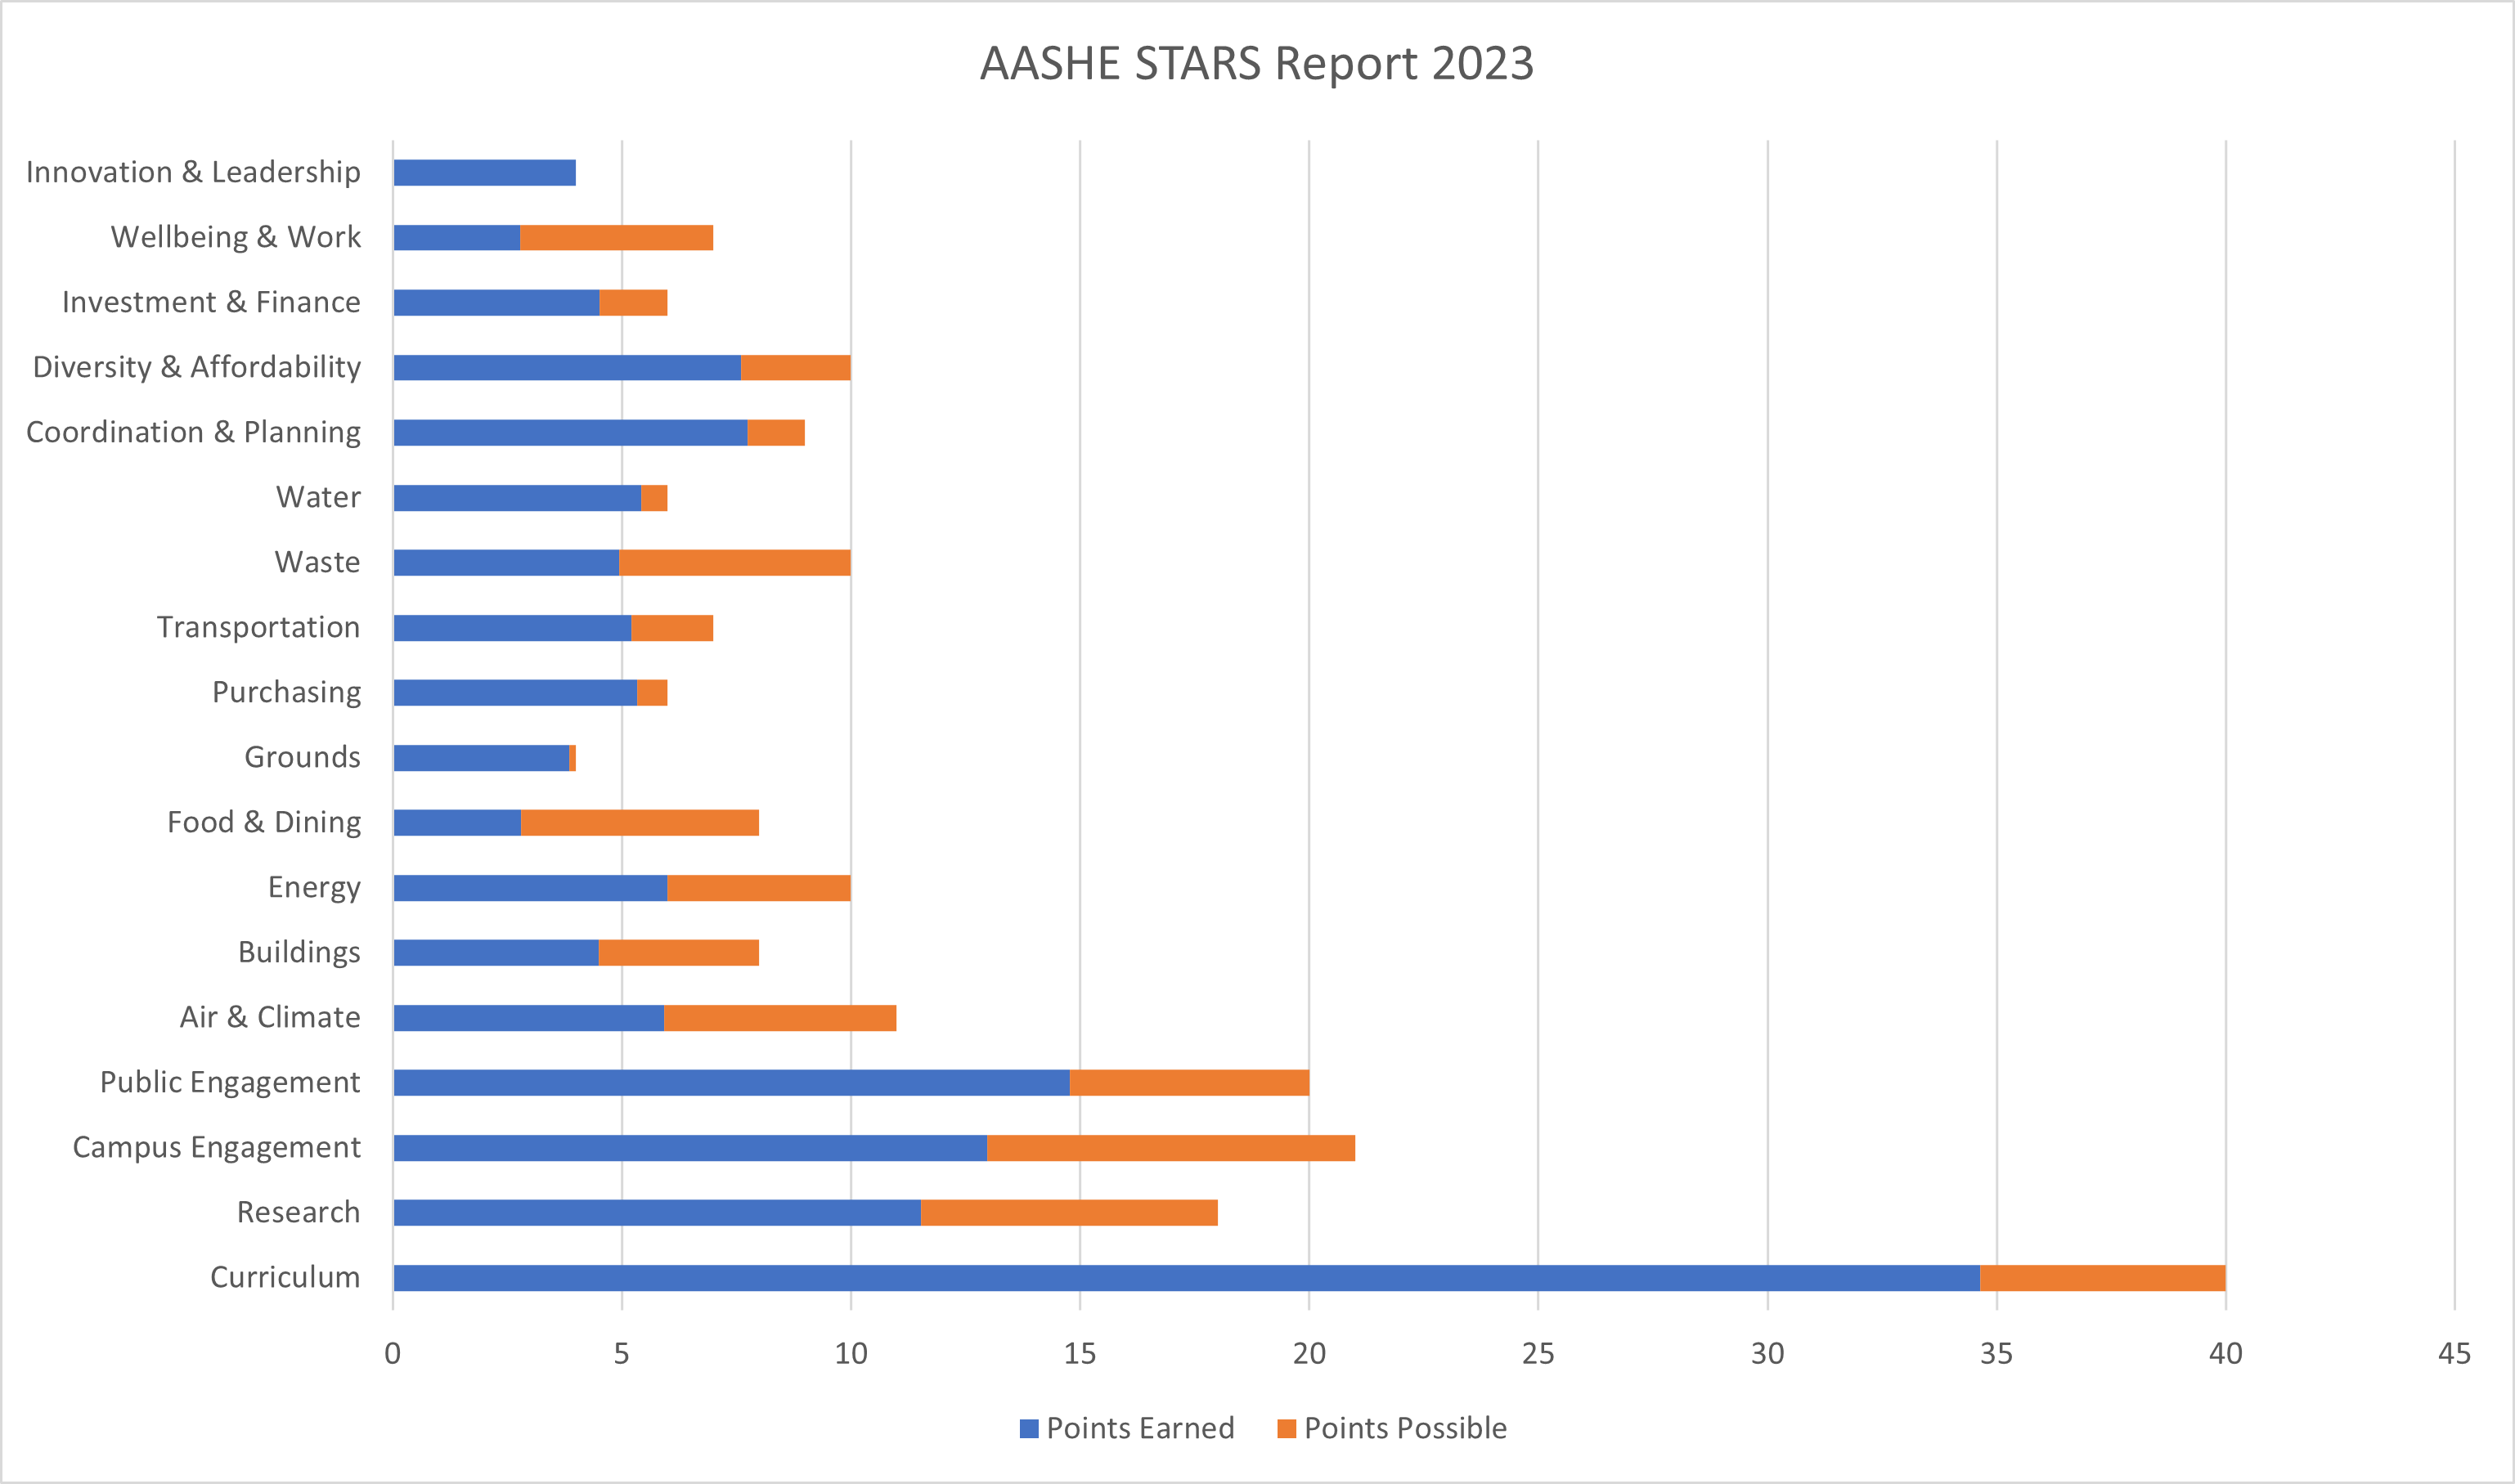 AASHE STARS report points earned graph